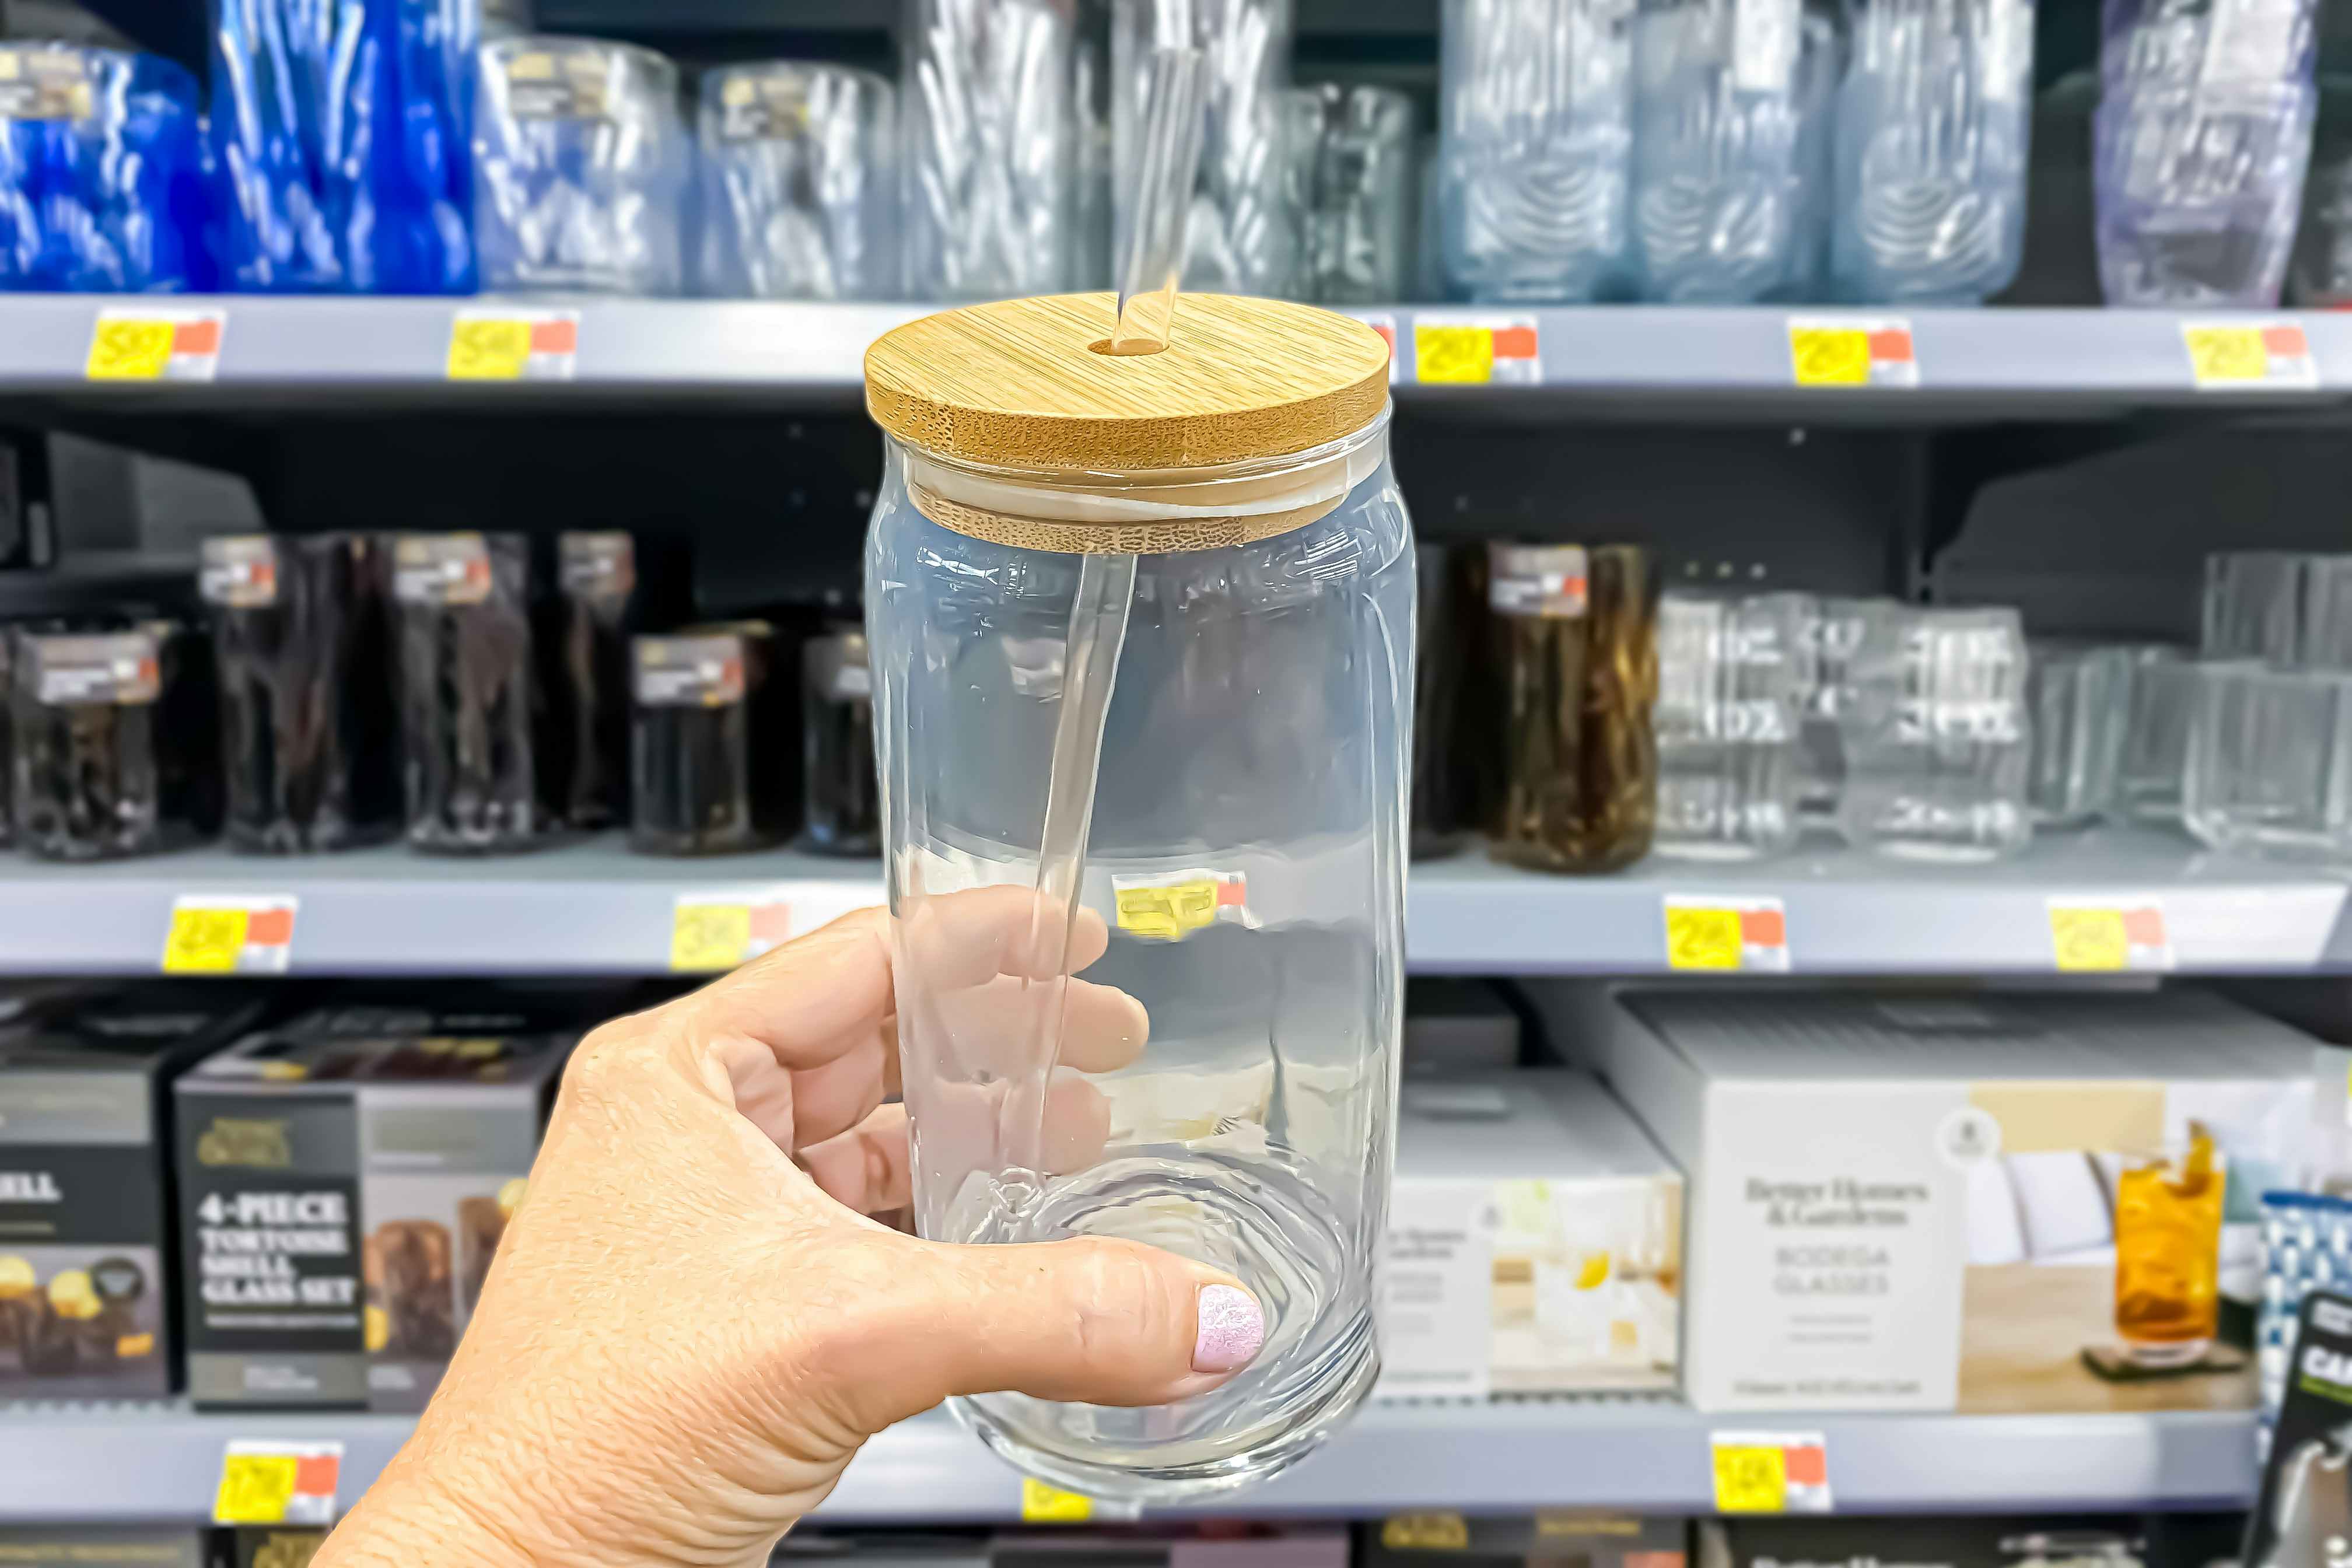 Will Sell Out — Glass Tumbler 4-Pack at Walmart for Just $8